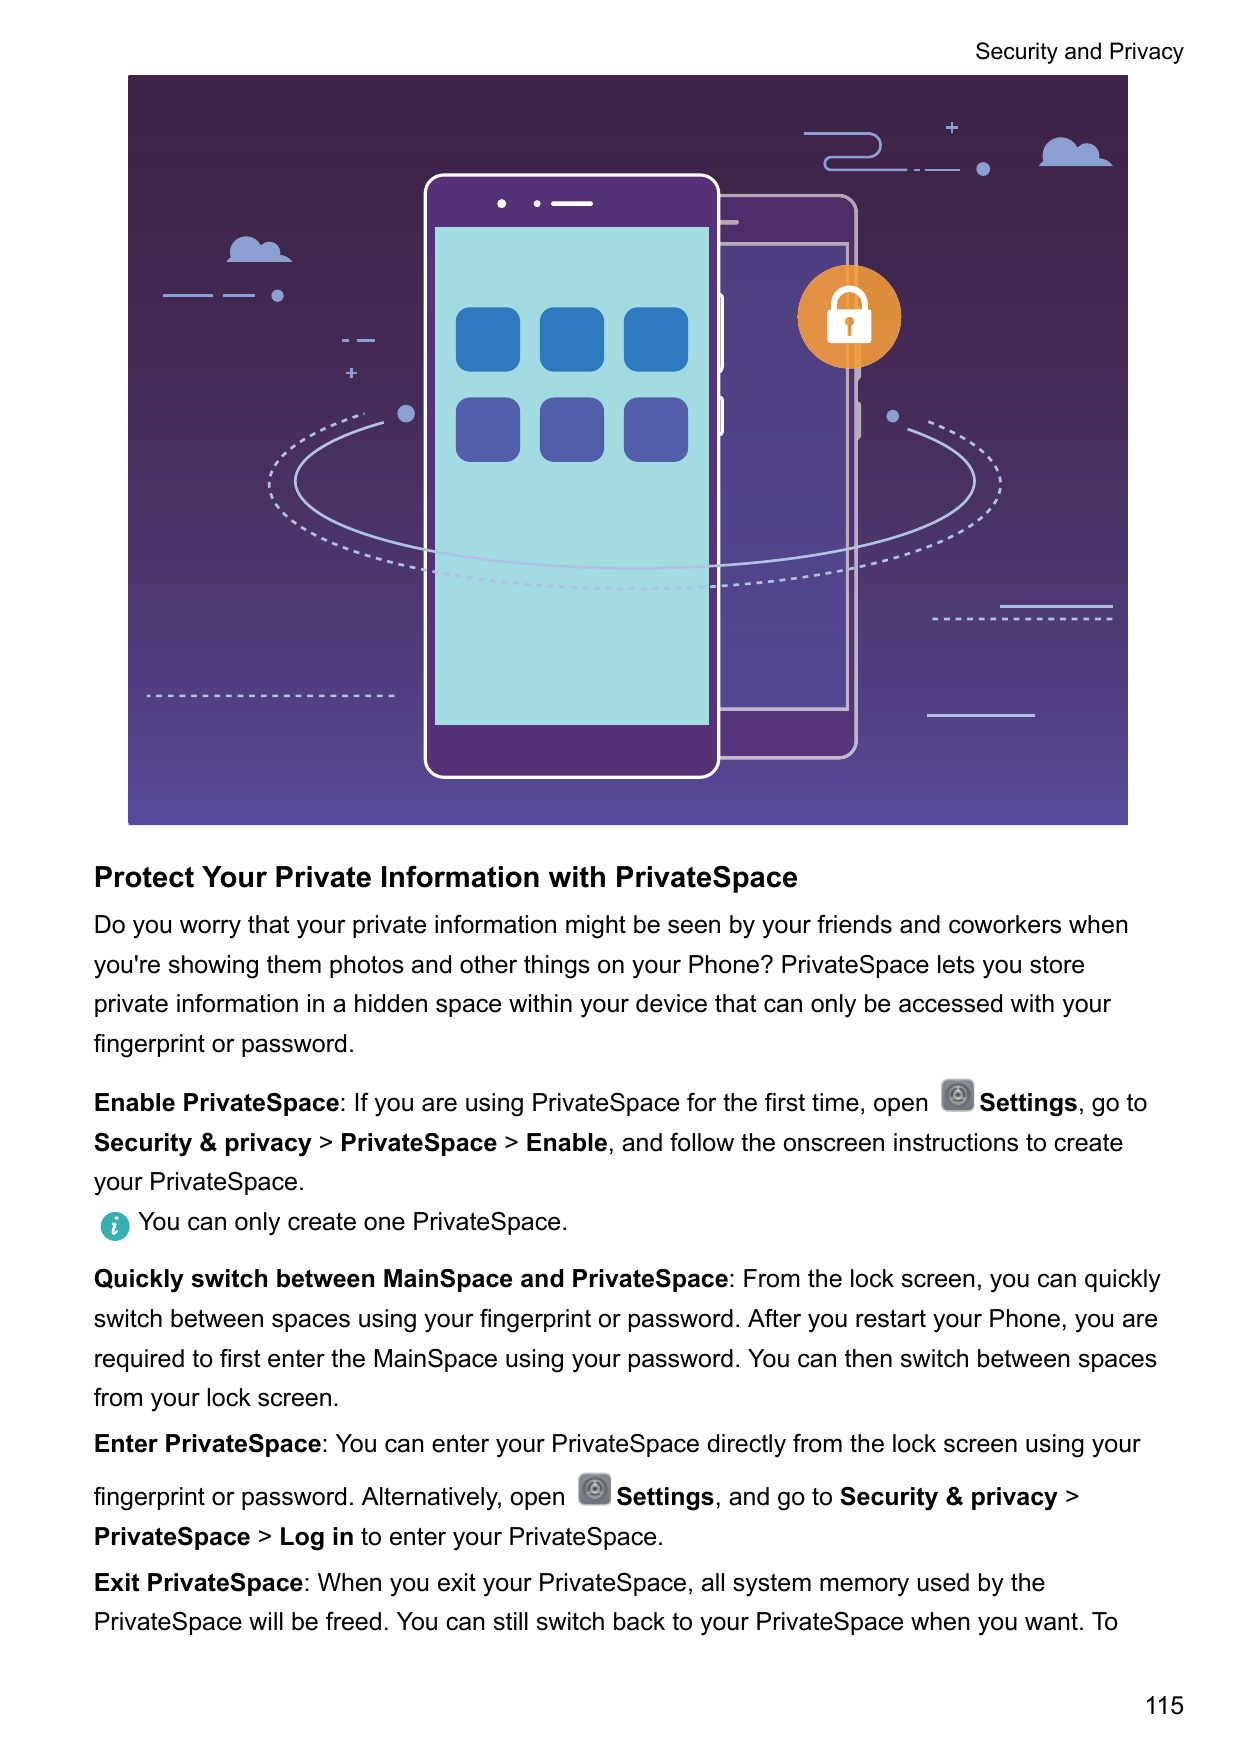 Security and PrivacyProtect Your Private Information with PrivateSpaceDo you worry that your private information might be seen b